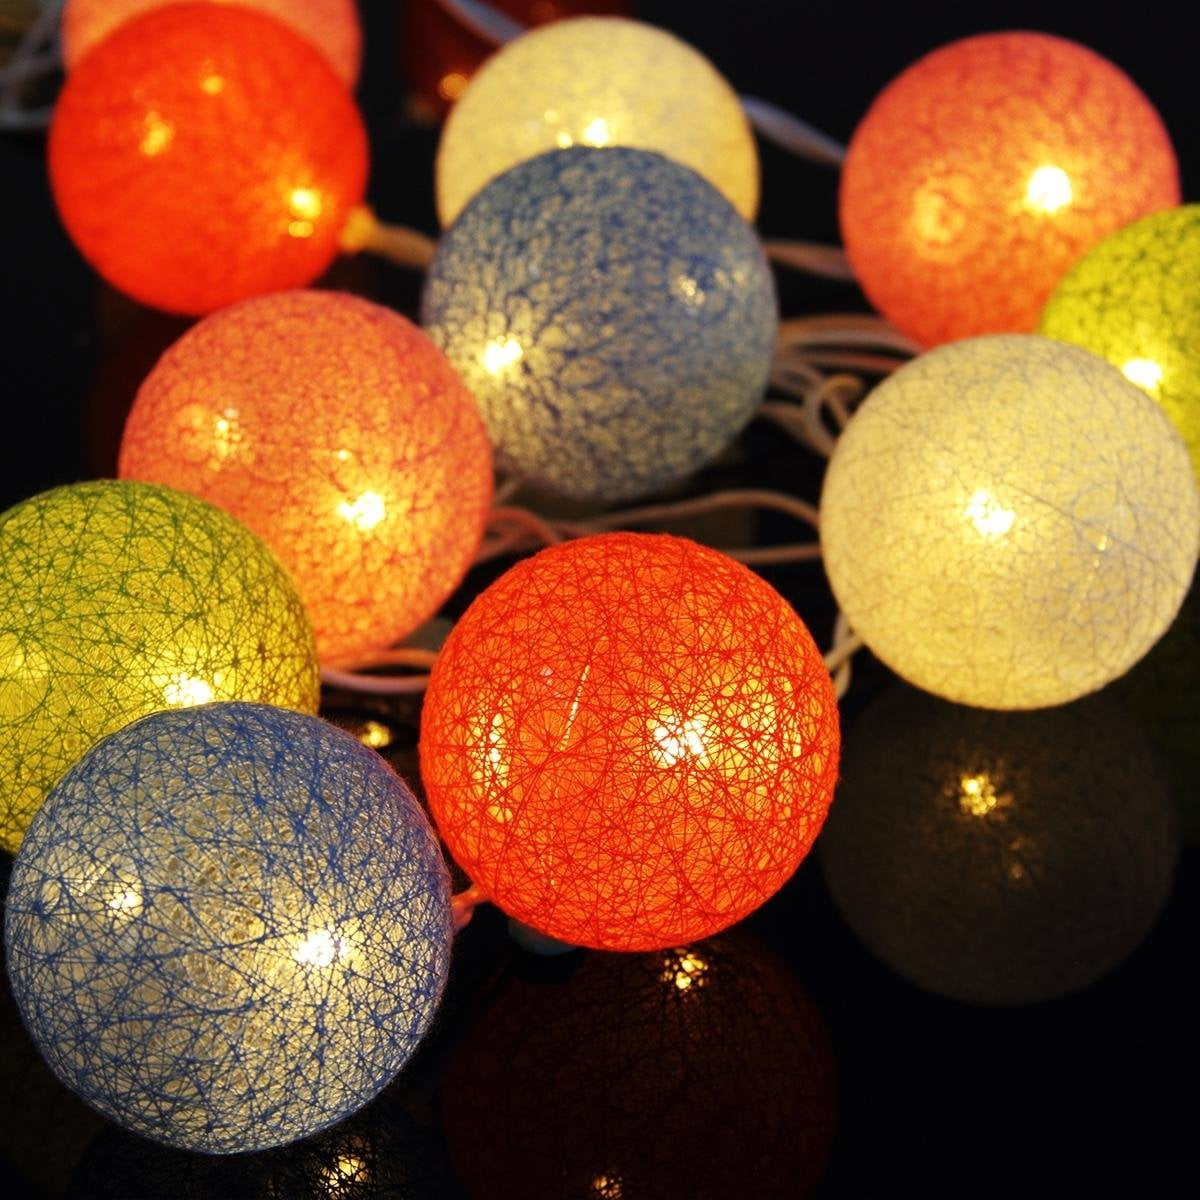 Chic 20 Cotton Ball LED String Lights Party Fairy Christmas Wedding Decor Lights 